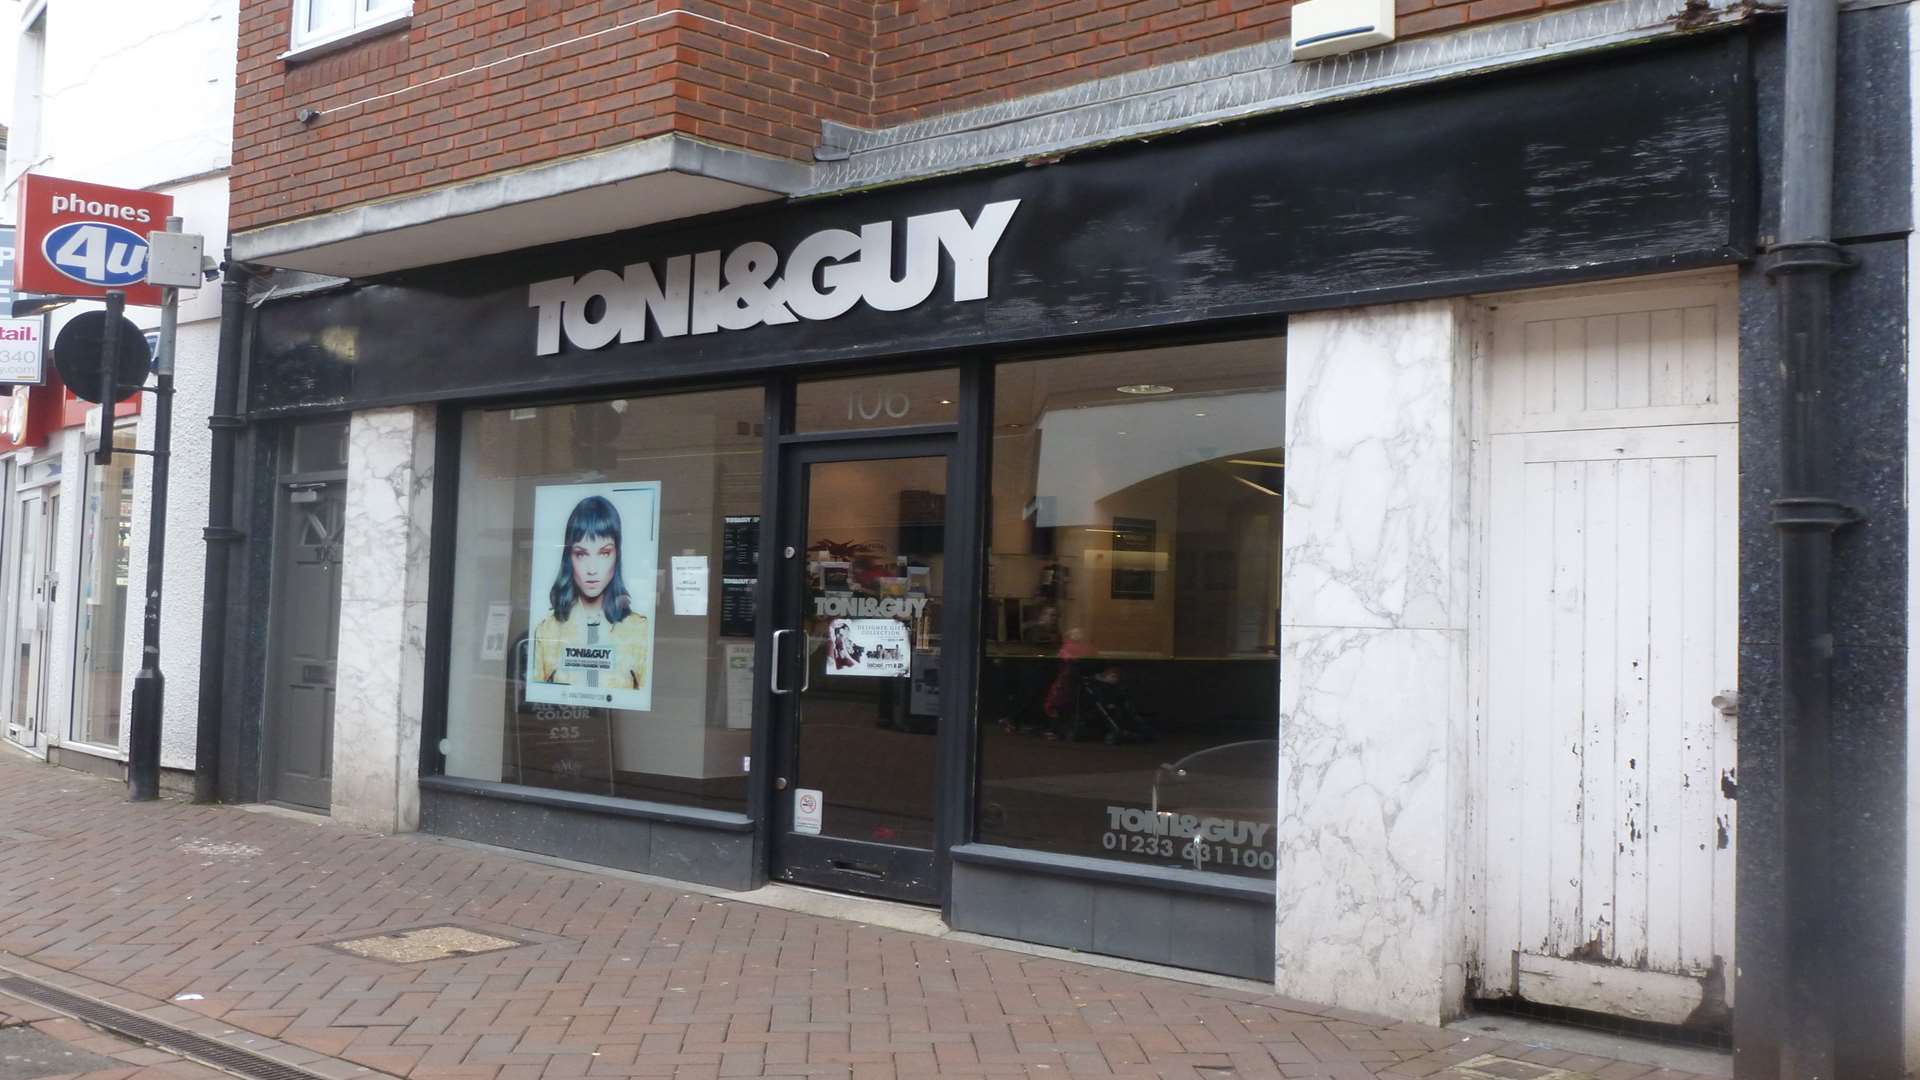 The Toni&Guy hairdressers, in Upper High Street, when it was open